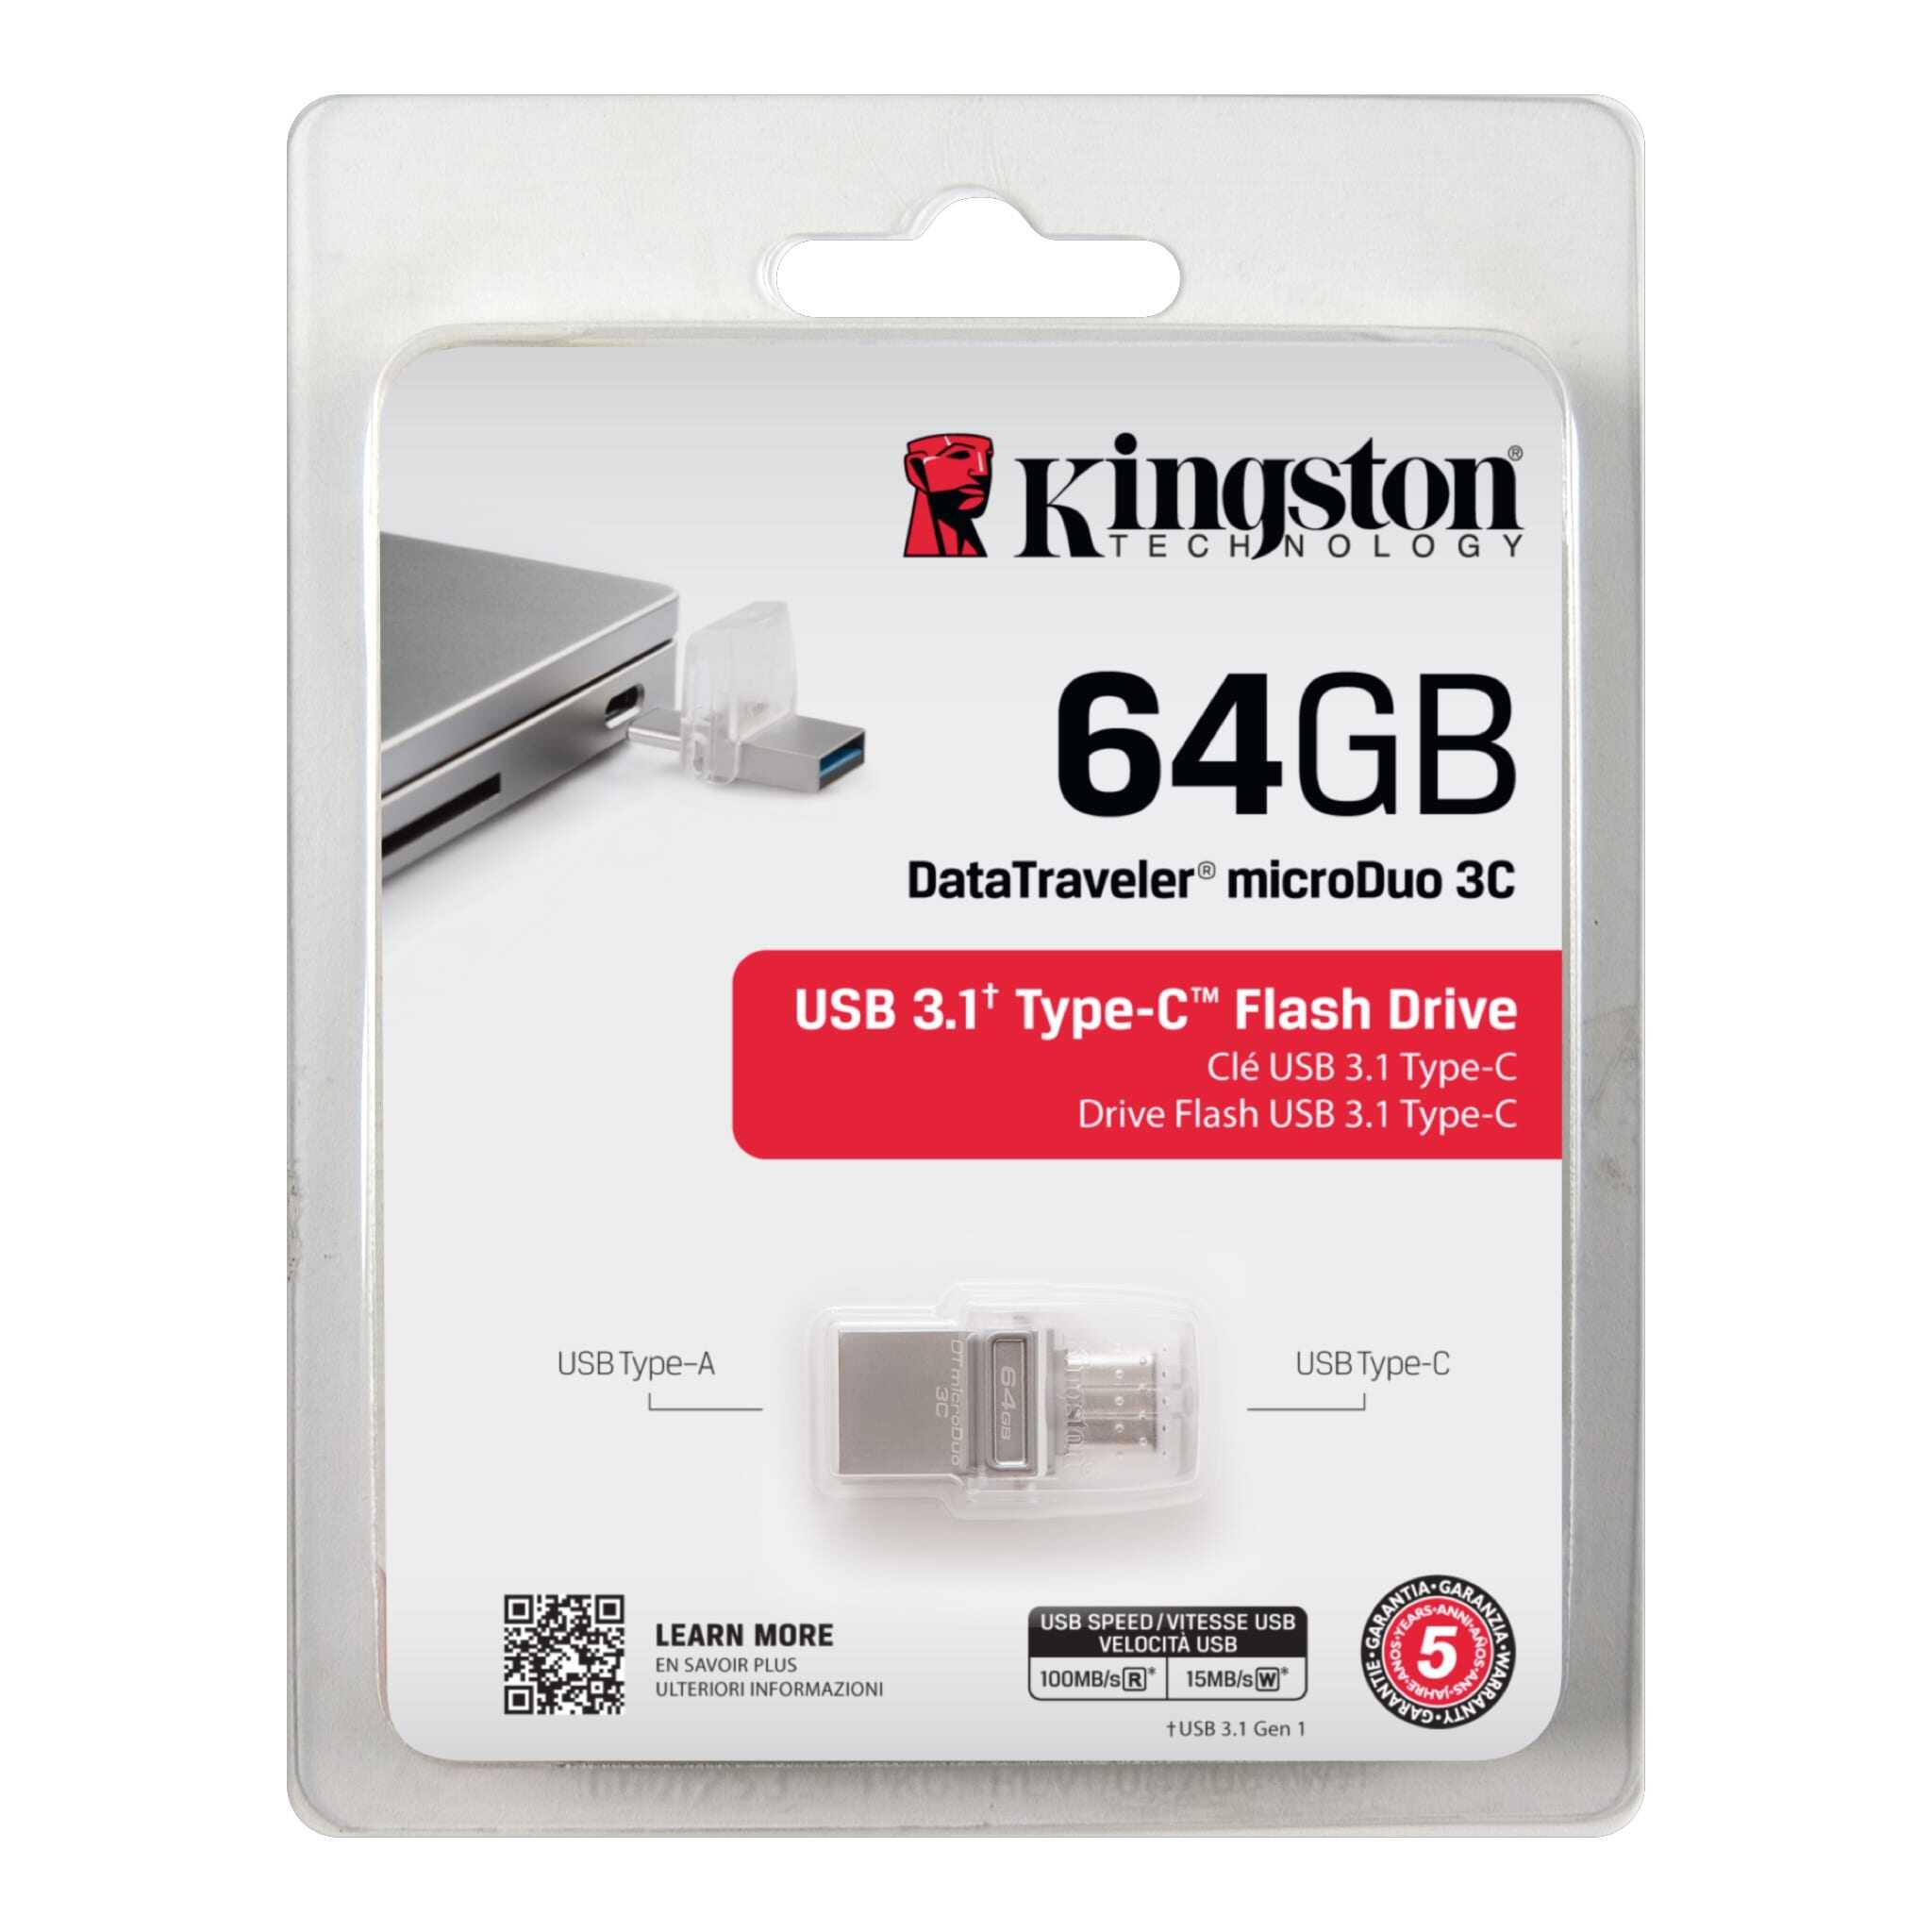 Kingston DataTraveler microDuo 3c USB Flash Drive (32GB / 64GB / 128GB) with Dual Interface for USB Type-A and USB Type-C, Plug and Play